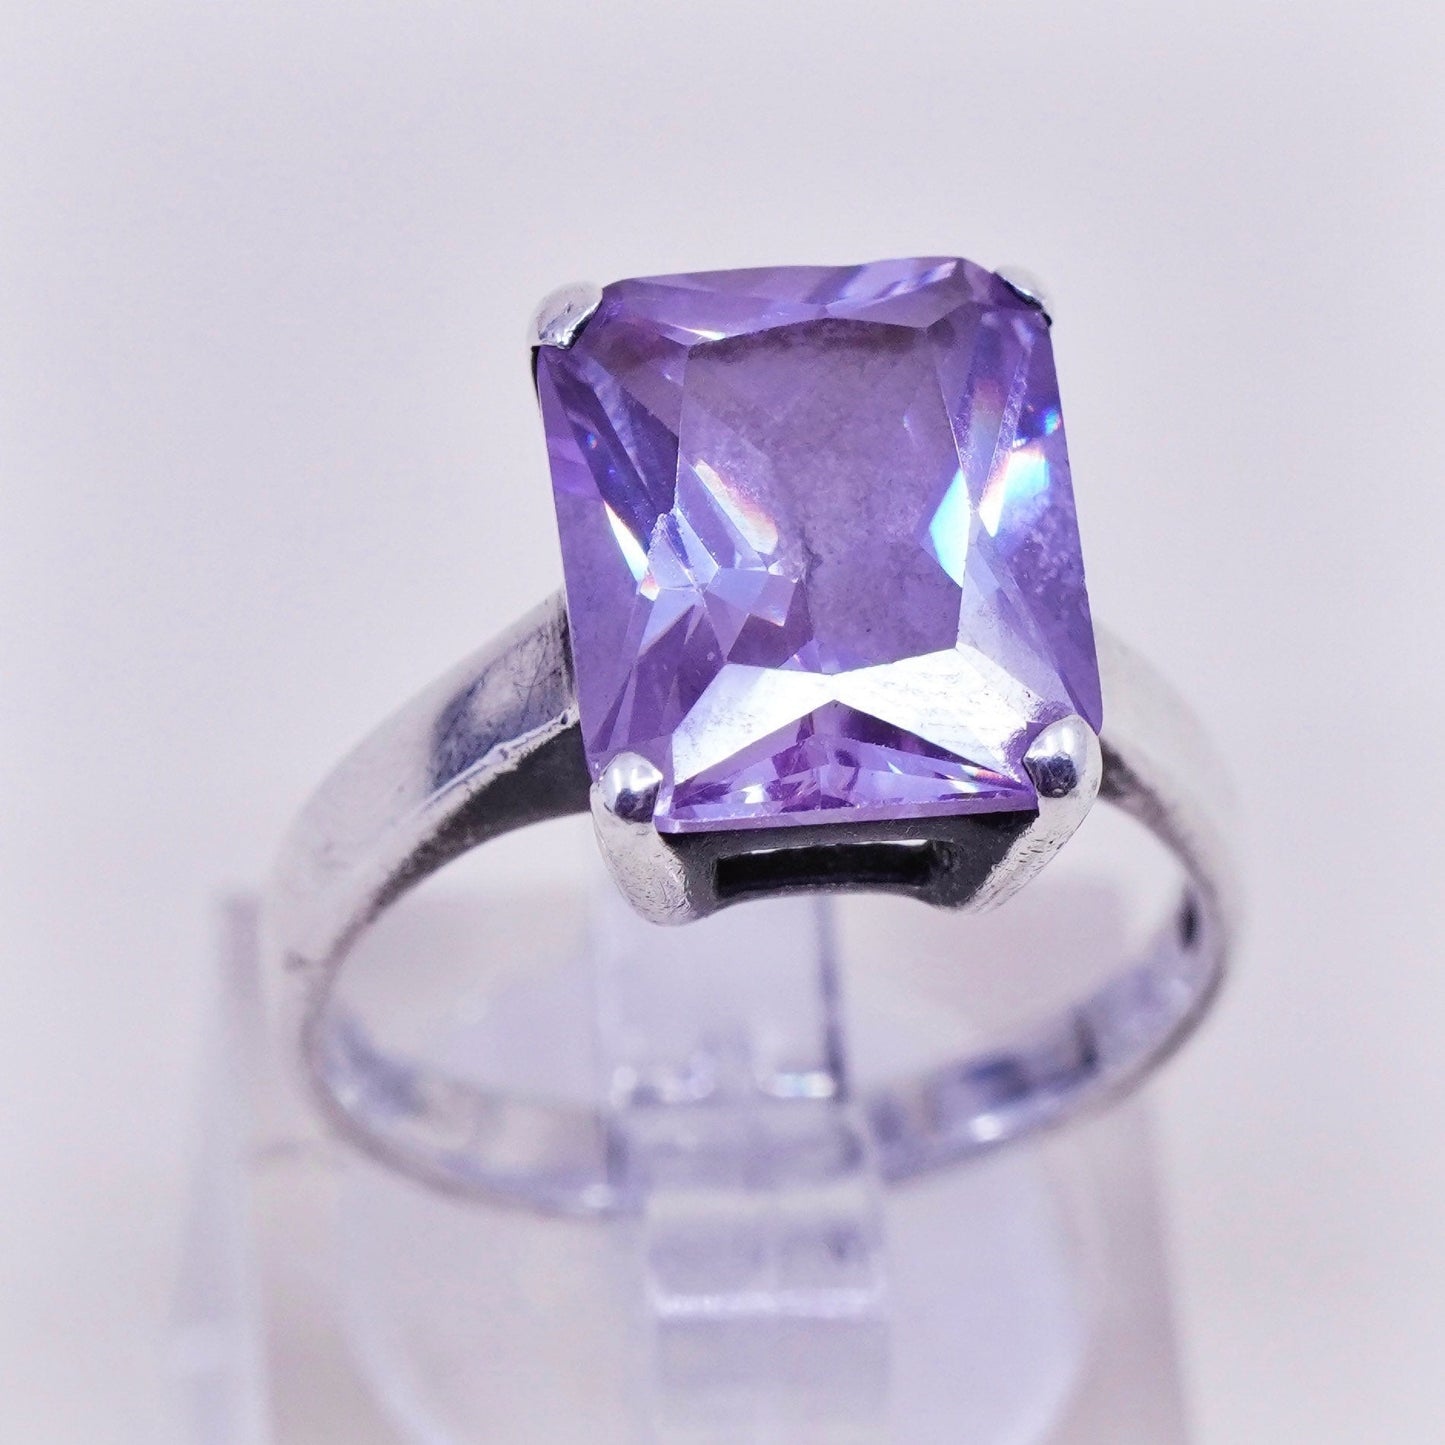 Size 7, Vintage sterling 925 silver handmade statement ring with amethyst